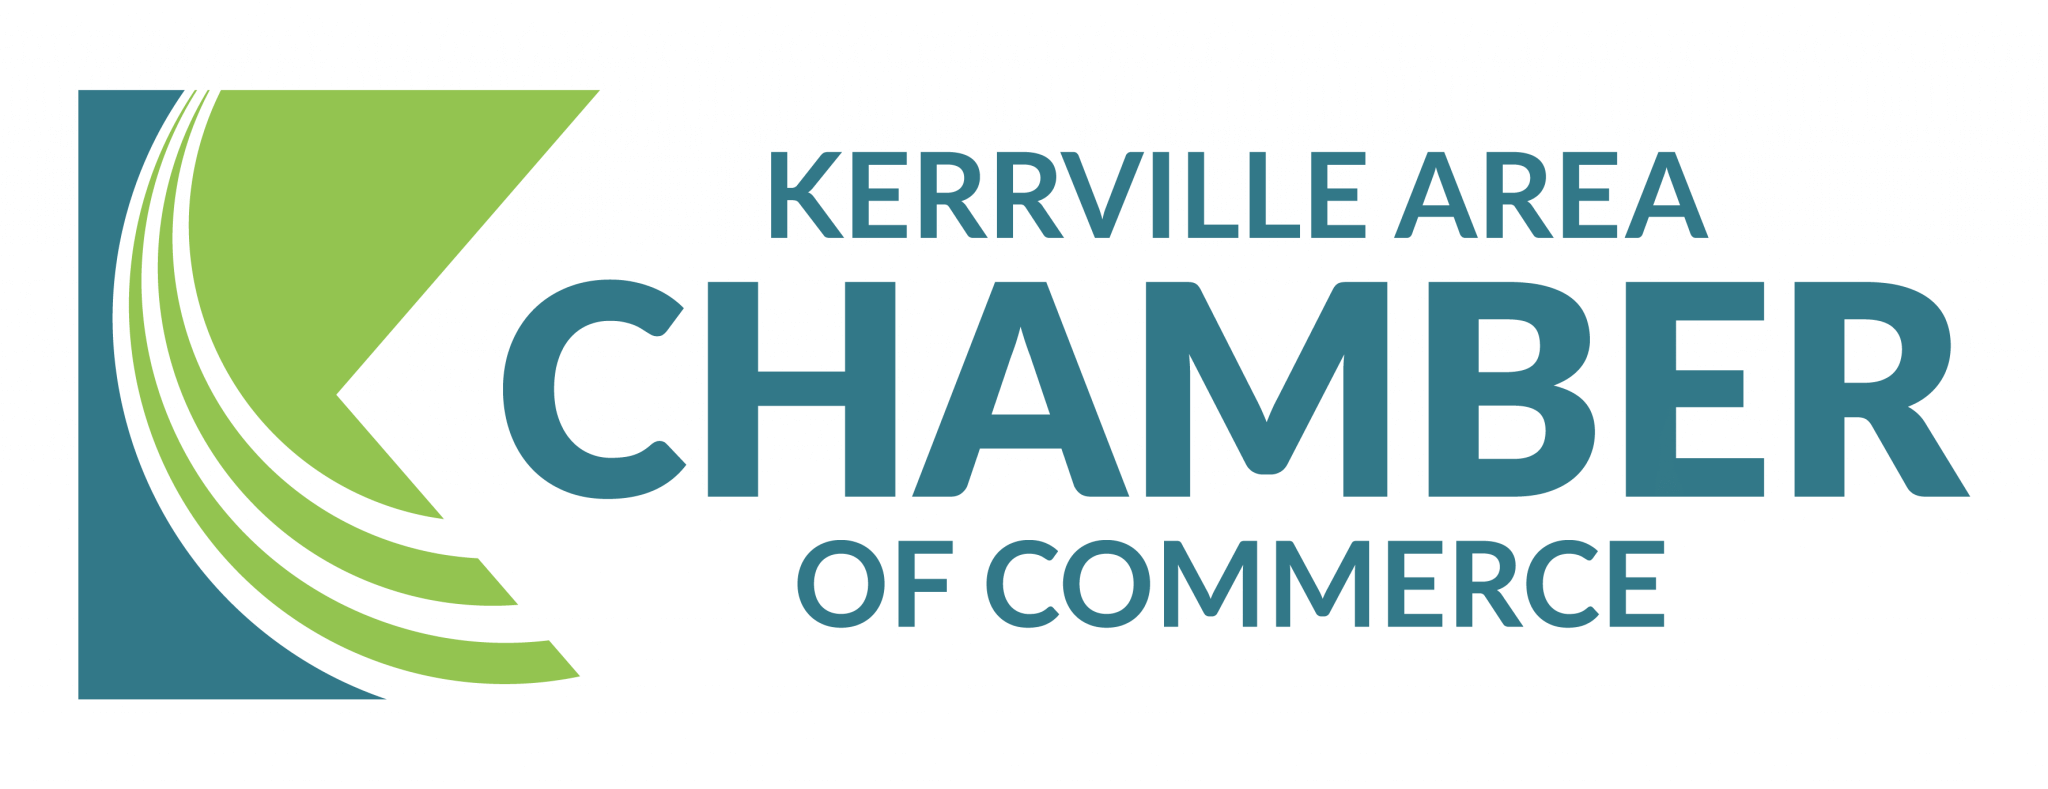 About the Chamber Kerrville Area Chamber of Commerce